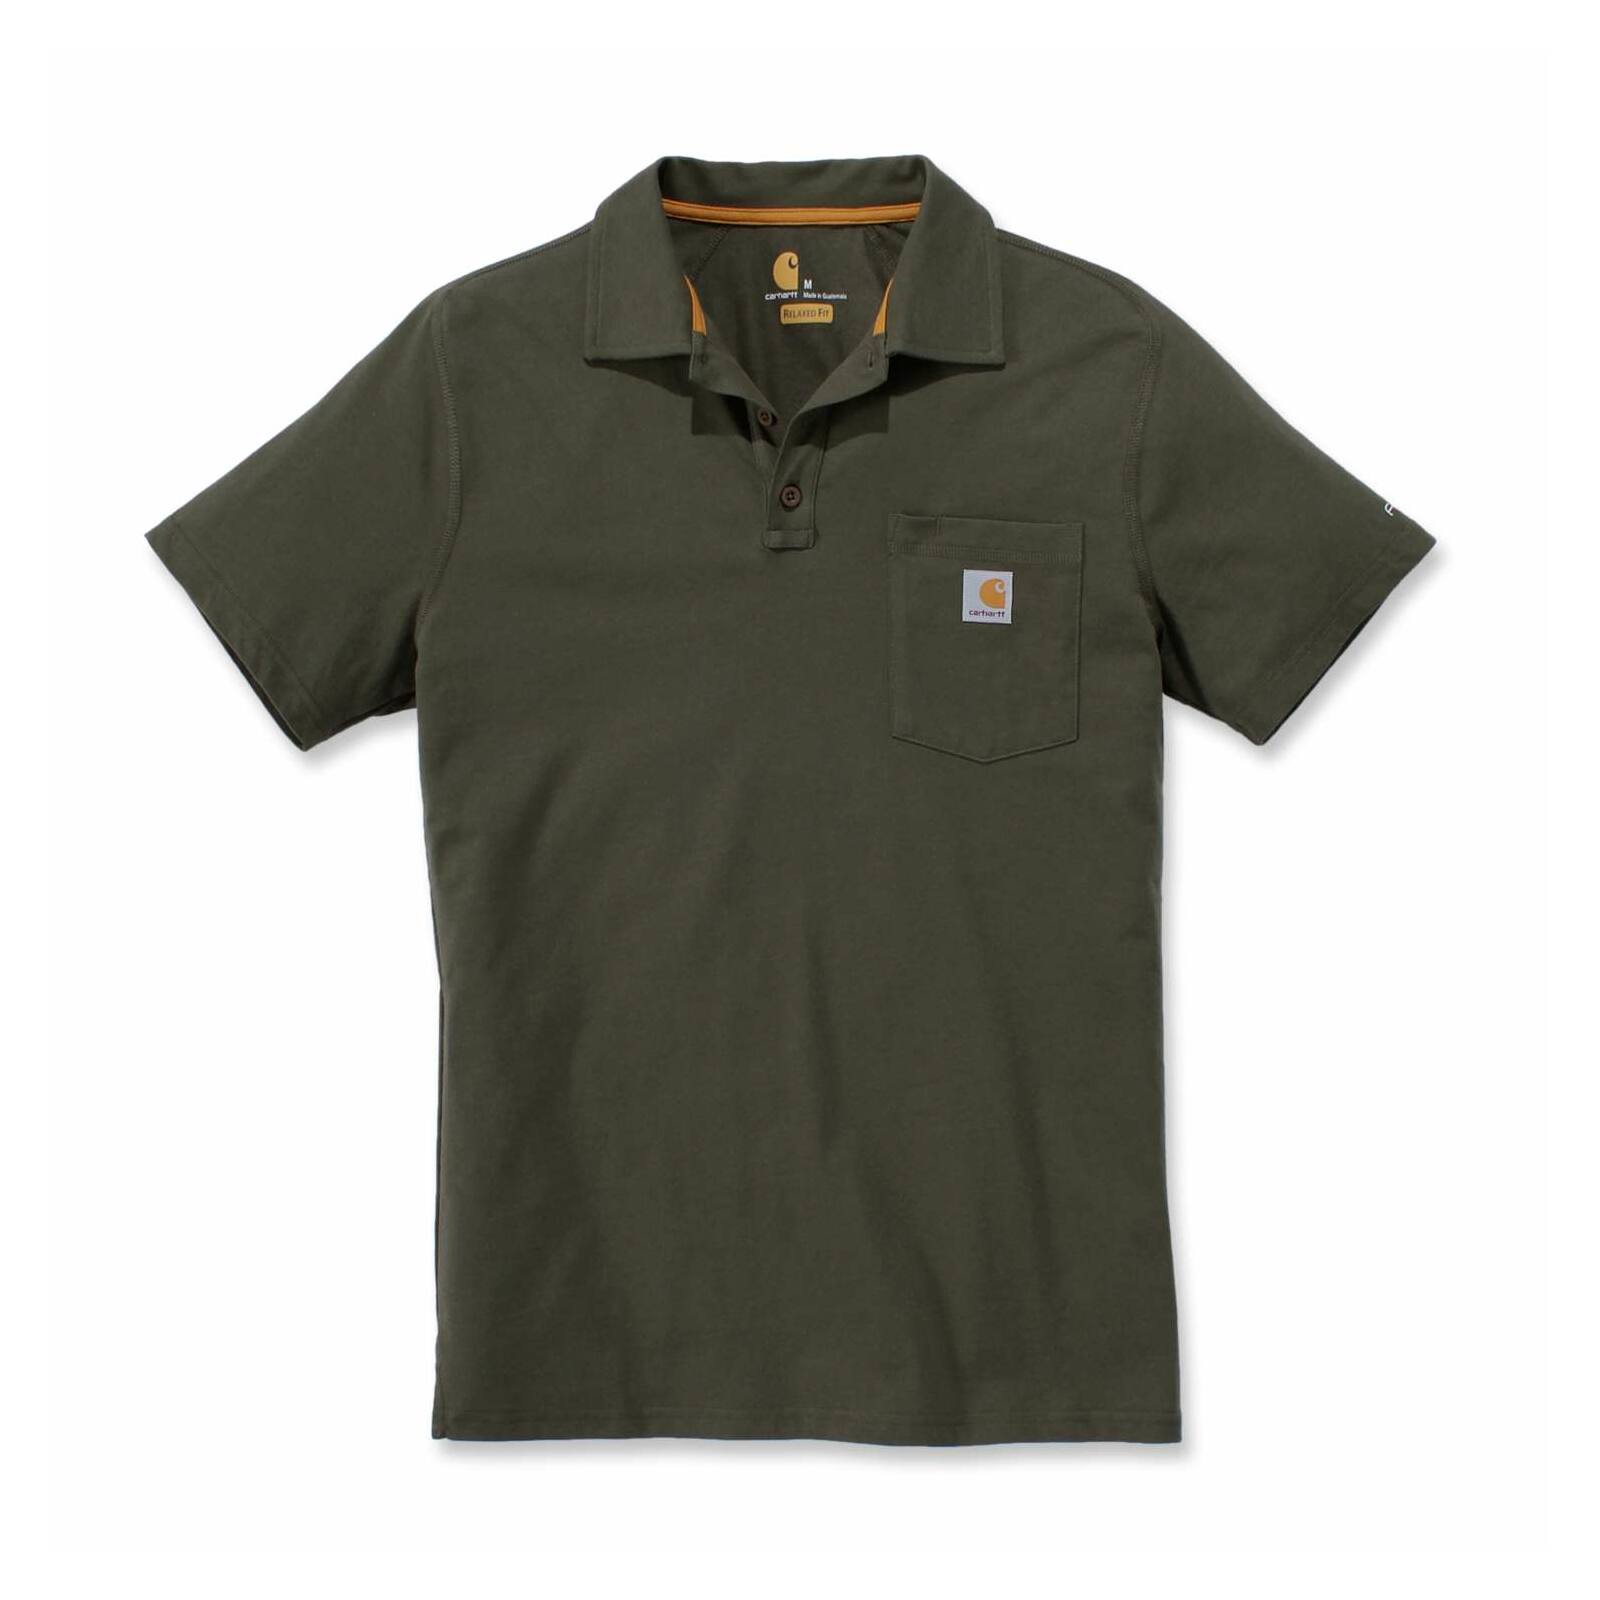 Carhartt Force Cotton Delmont Pocket Polo - Roadieworks.com - Online ...